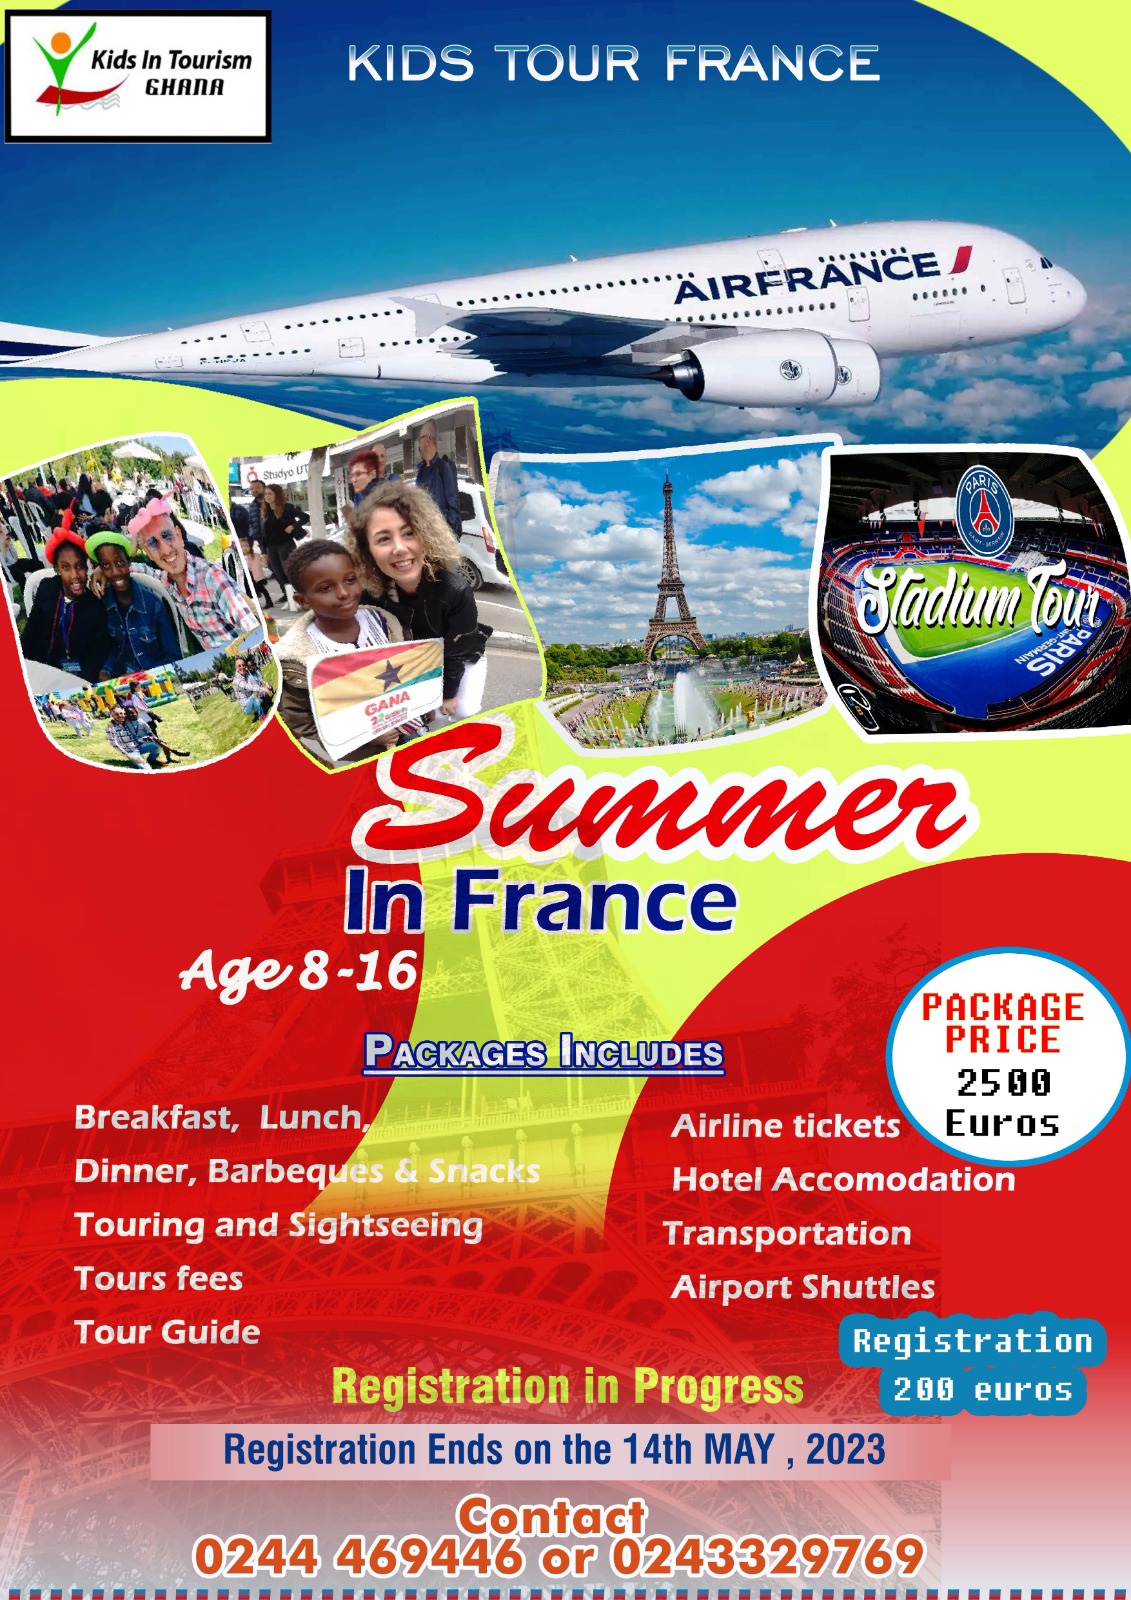 Kids in Tourism Ghana "Kids Tour France" schedule for June 2023 - Book Now